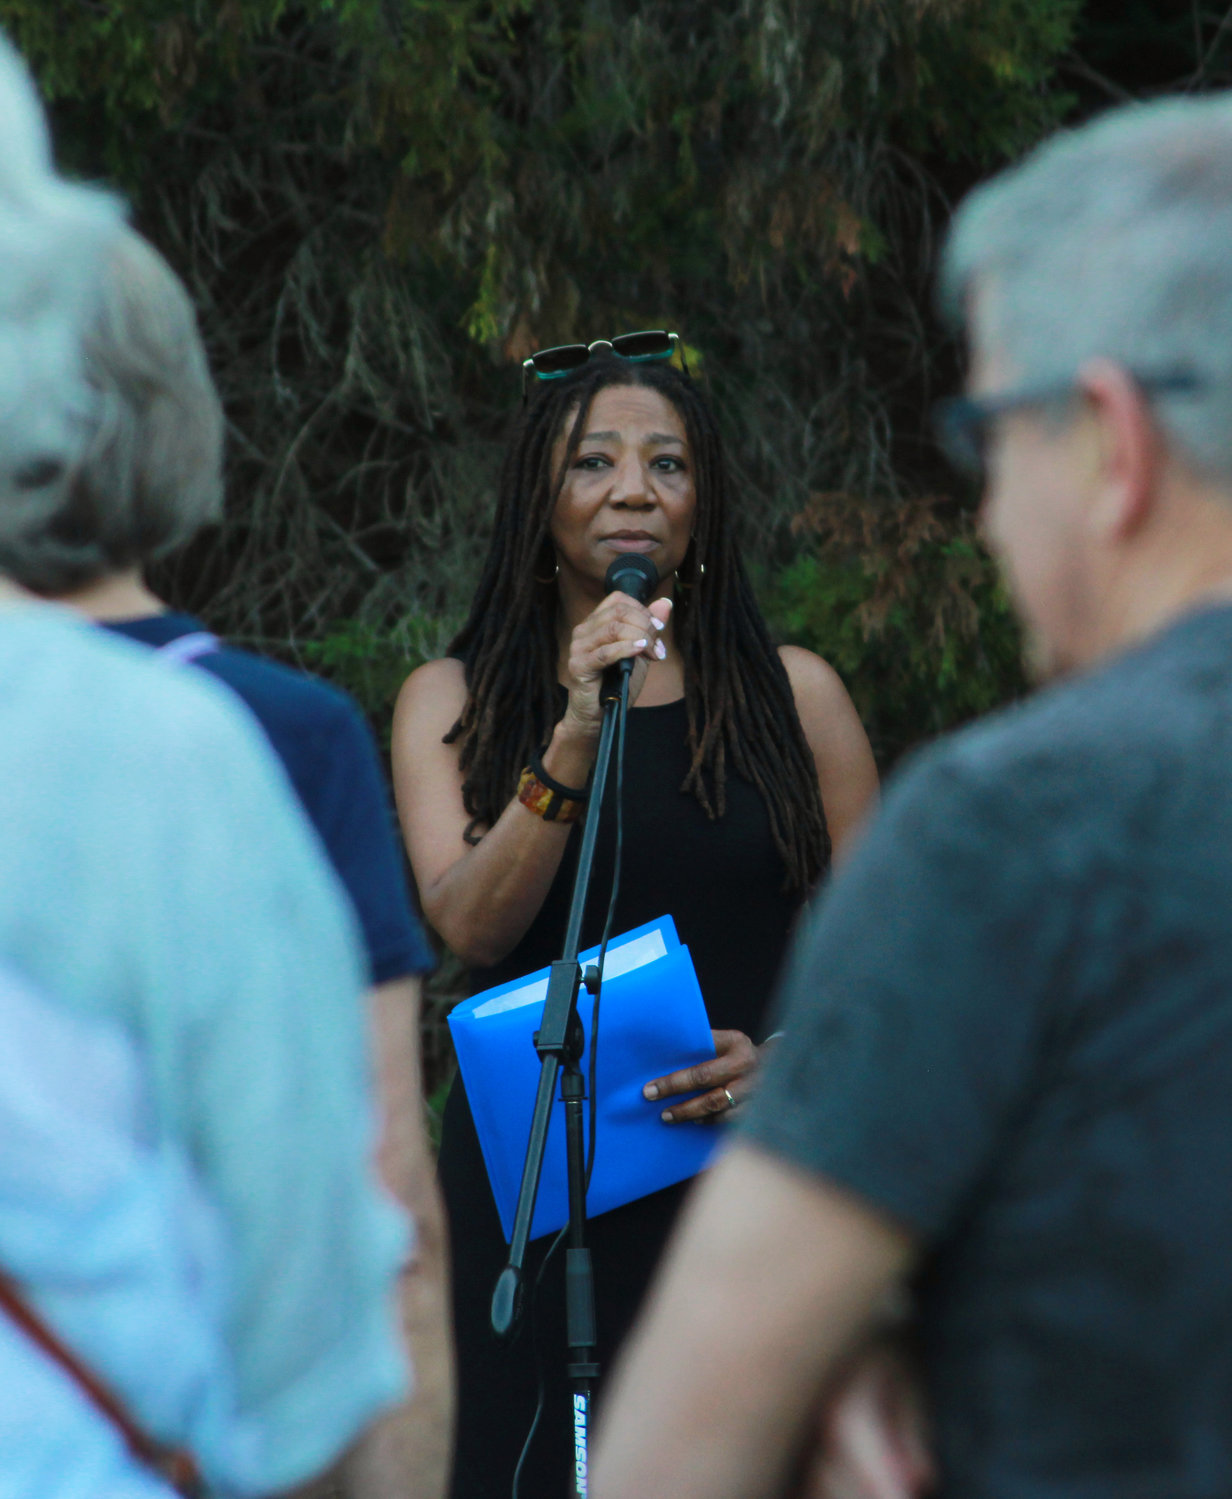 Commisioner Karen Howard addresses the crowd during the Chatham County vigil for recent mass shootings on Sunday, May 29, in Pittsboro. “I am heartbroken to see you all here,” Howard said.